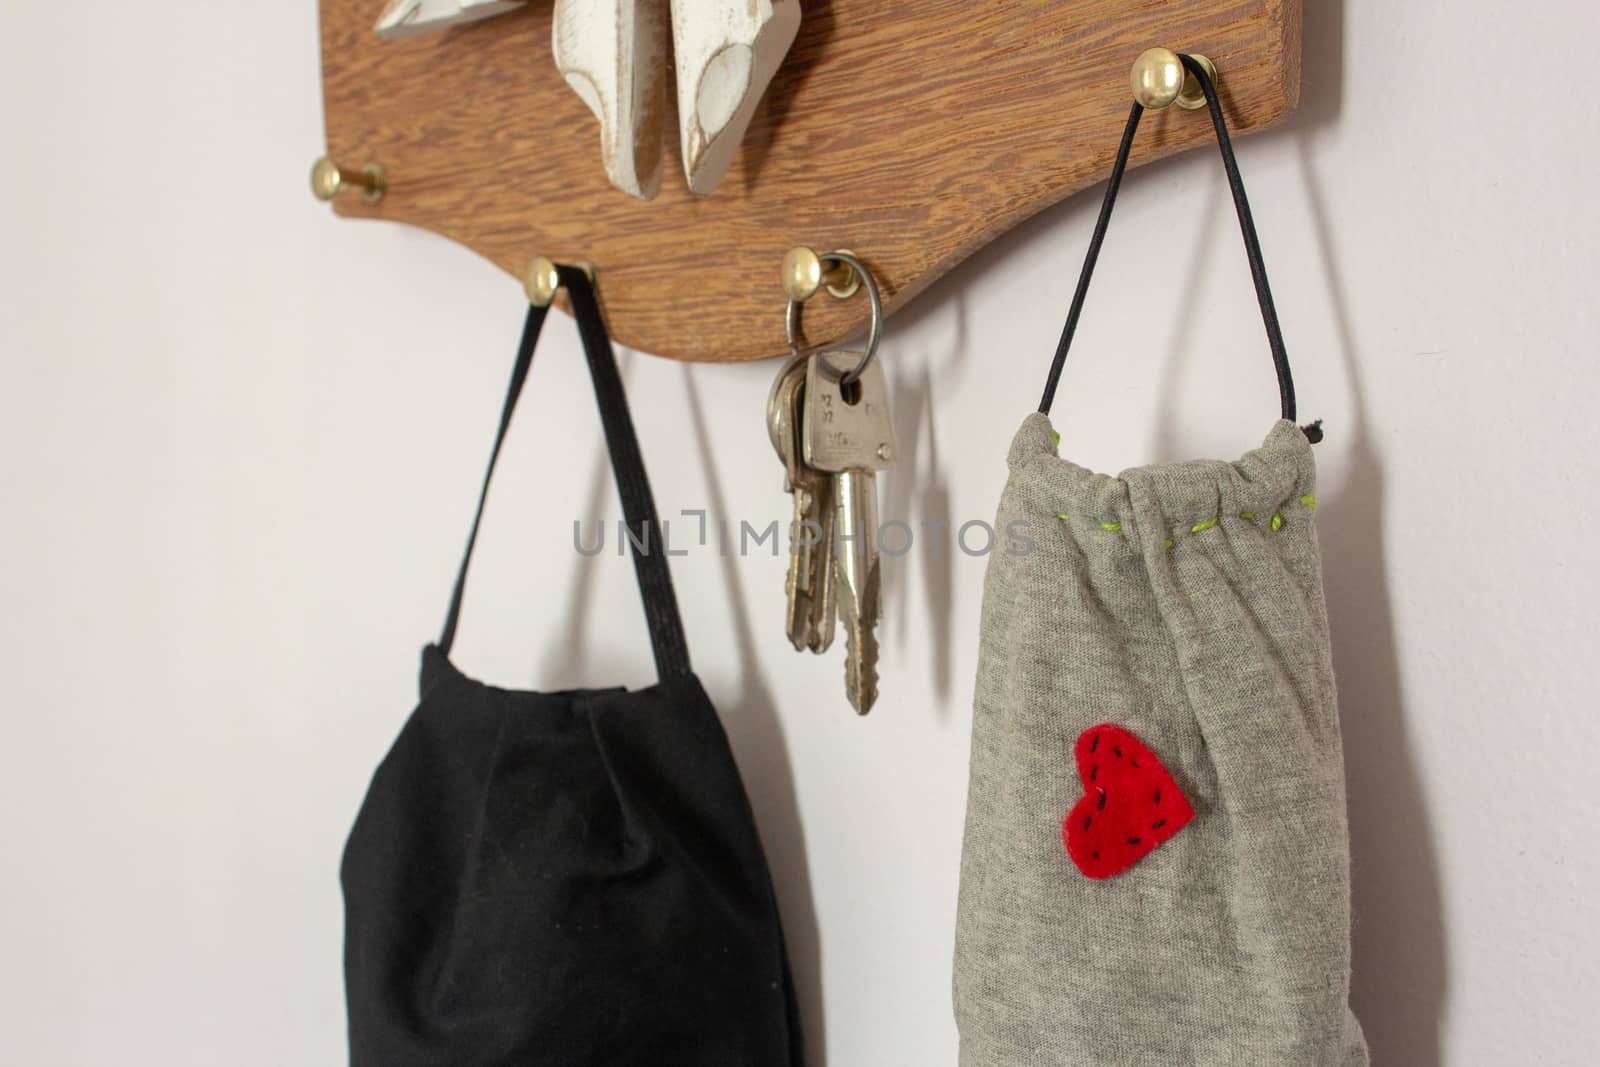 Masks hanging on the wall next to keys, as a new daily item to use because COVID-19